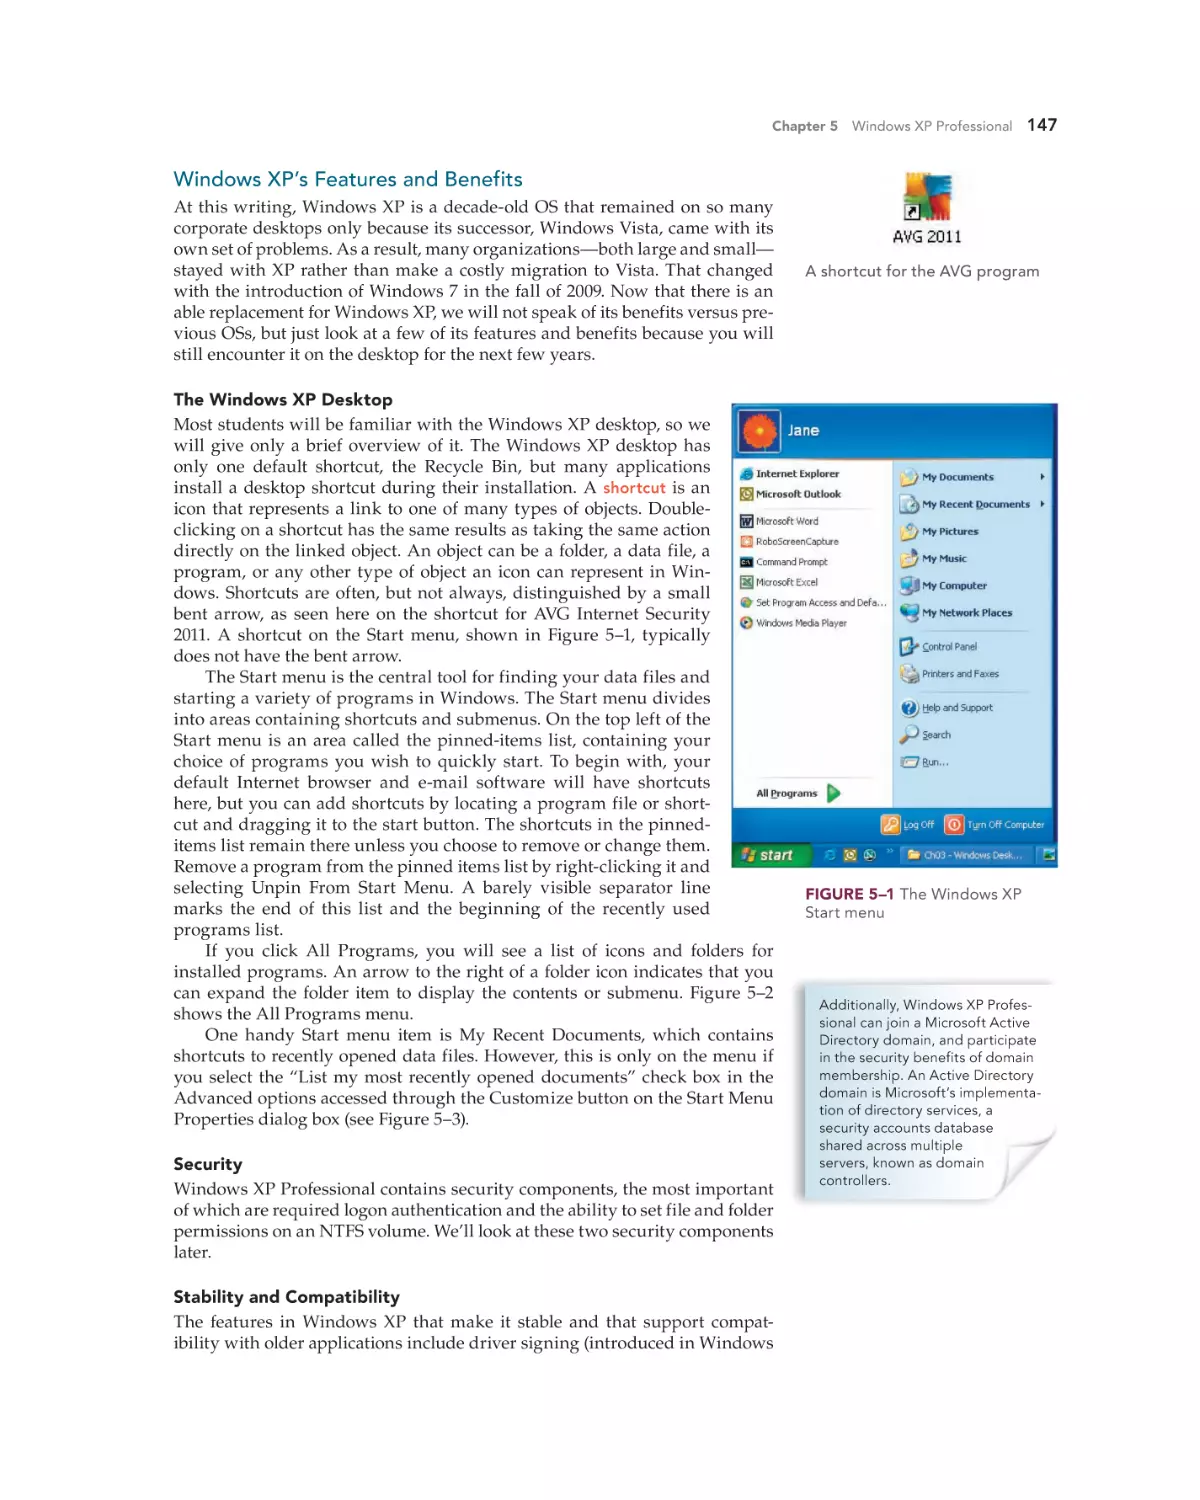 Windows XP’s Features and Benefits